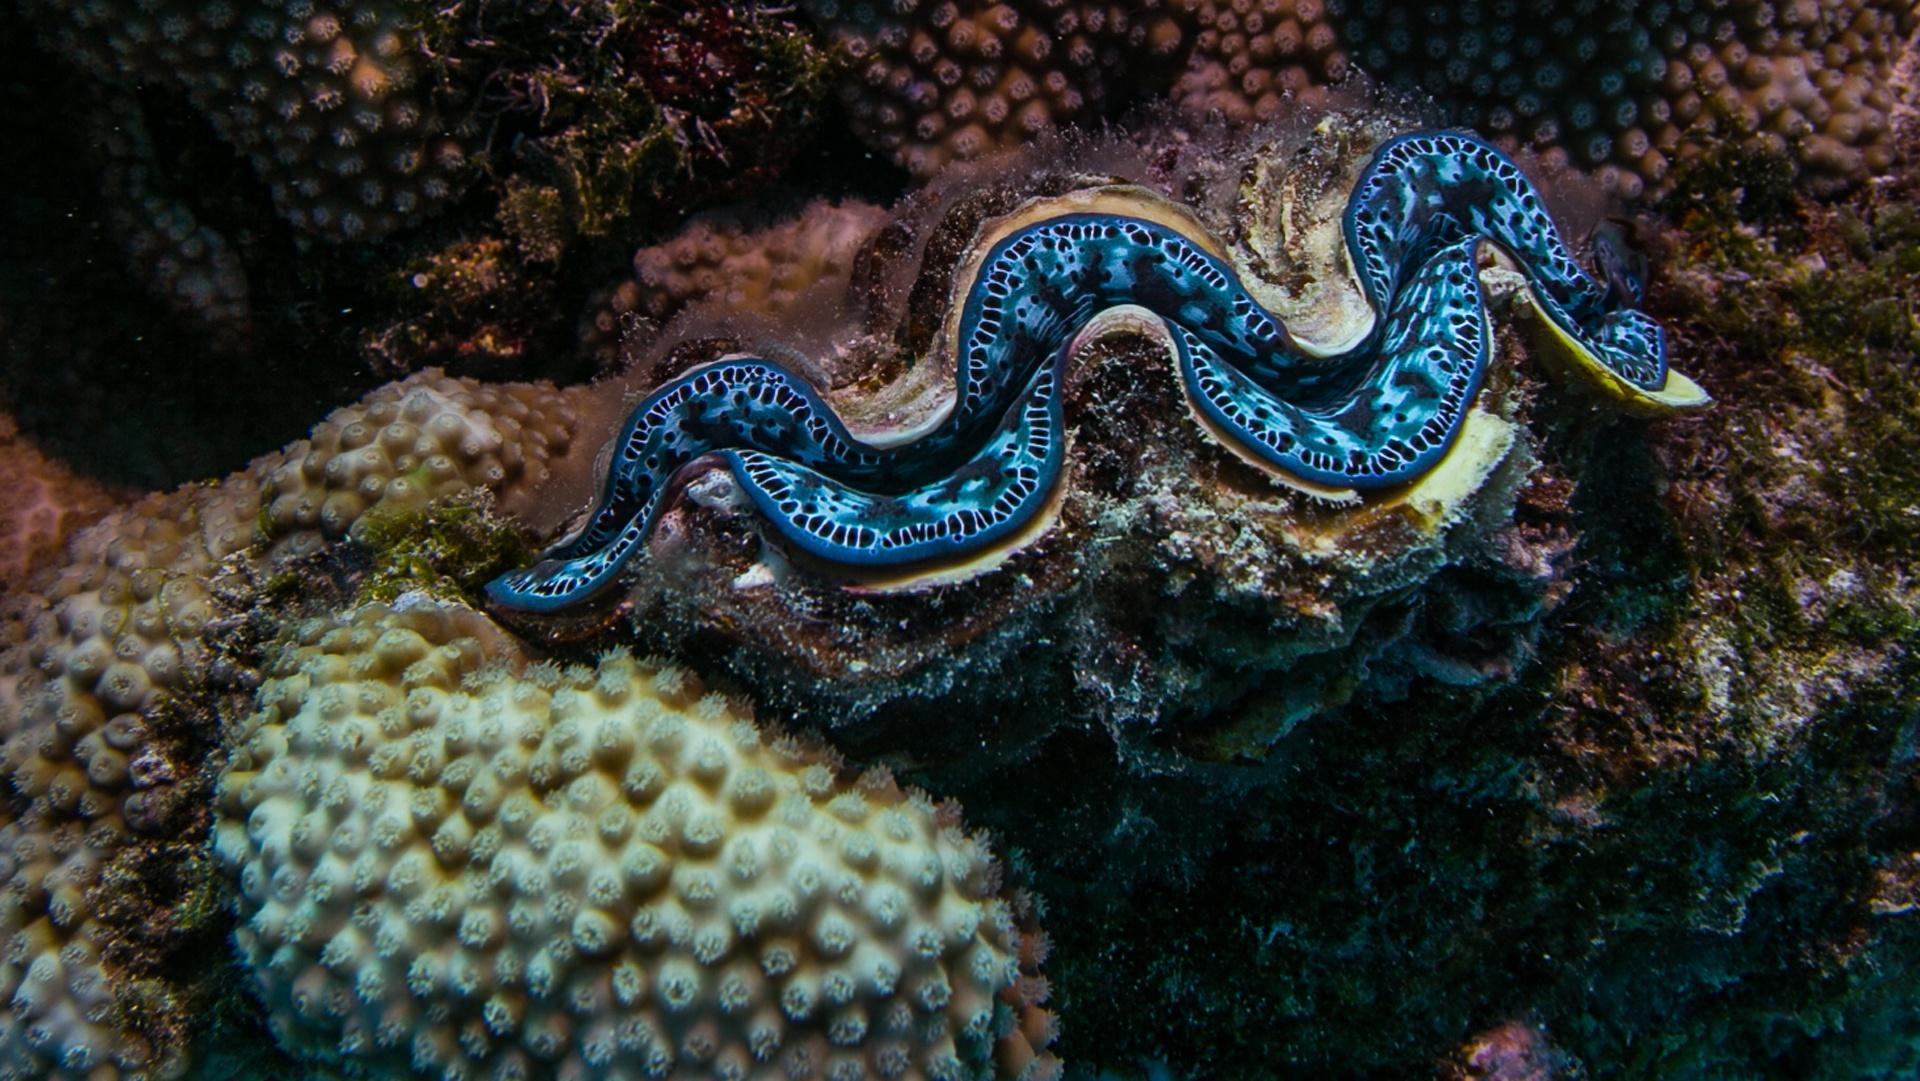 A giant clam nestled amongst coral on the Great Barrier Reef.